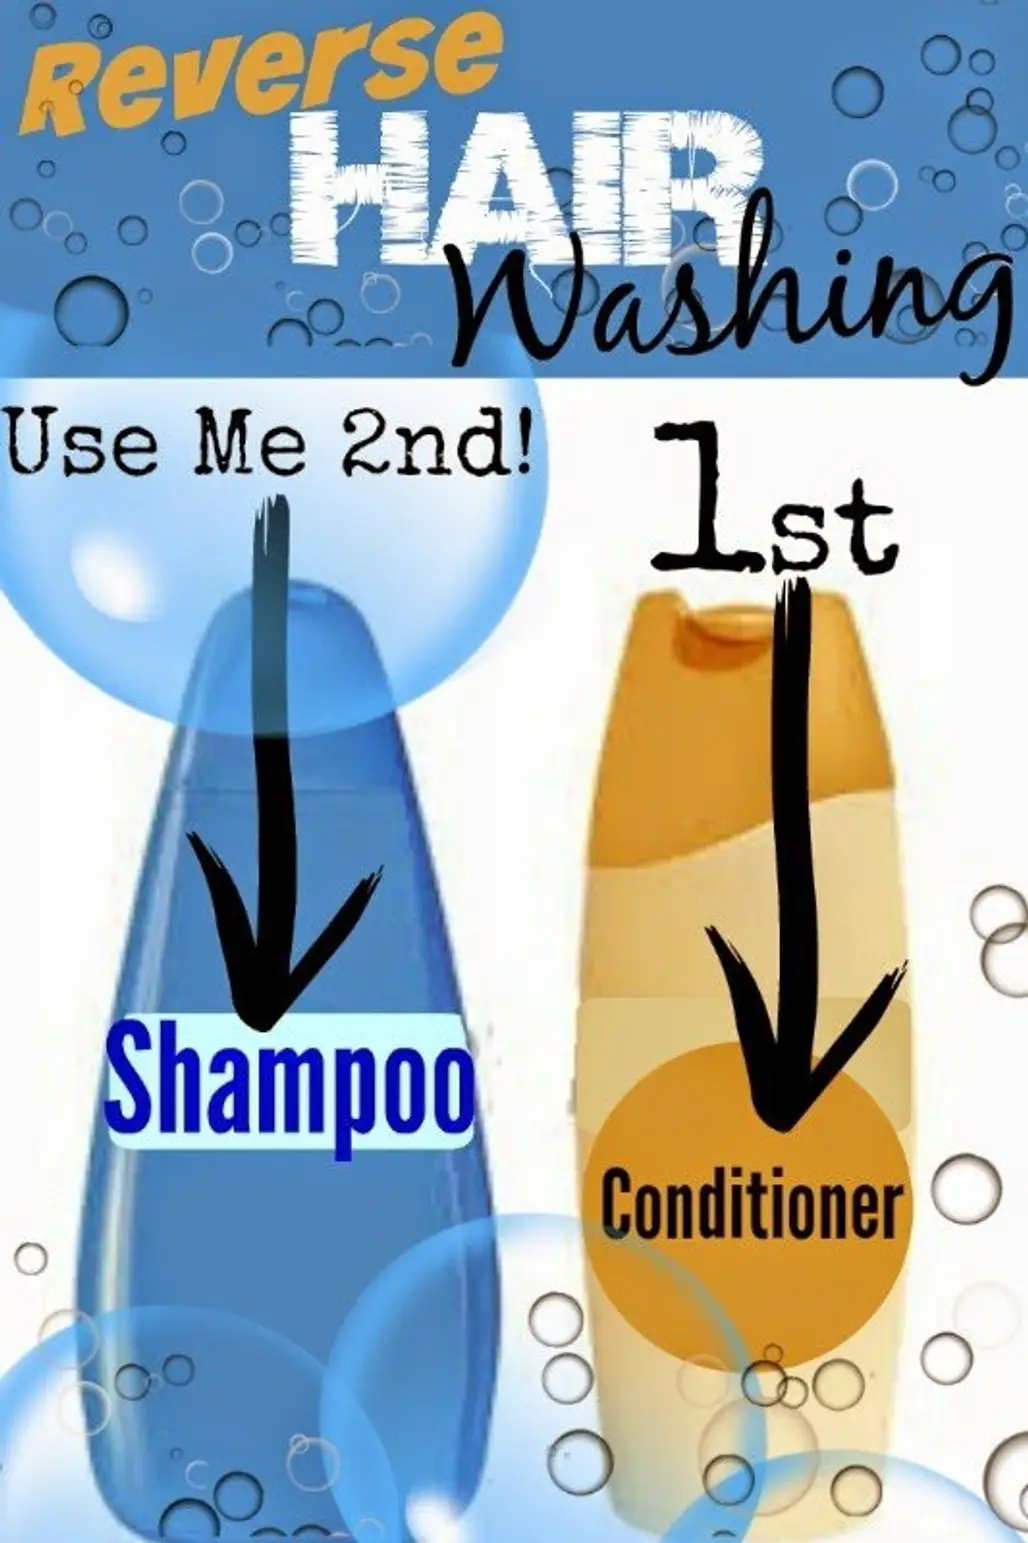 Have You Ever Tried Reverse Shampooing?